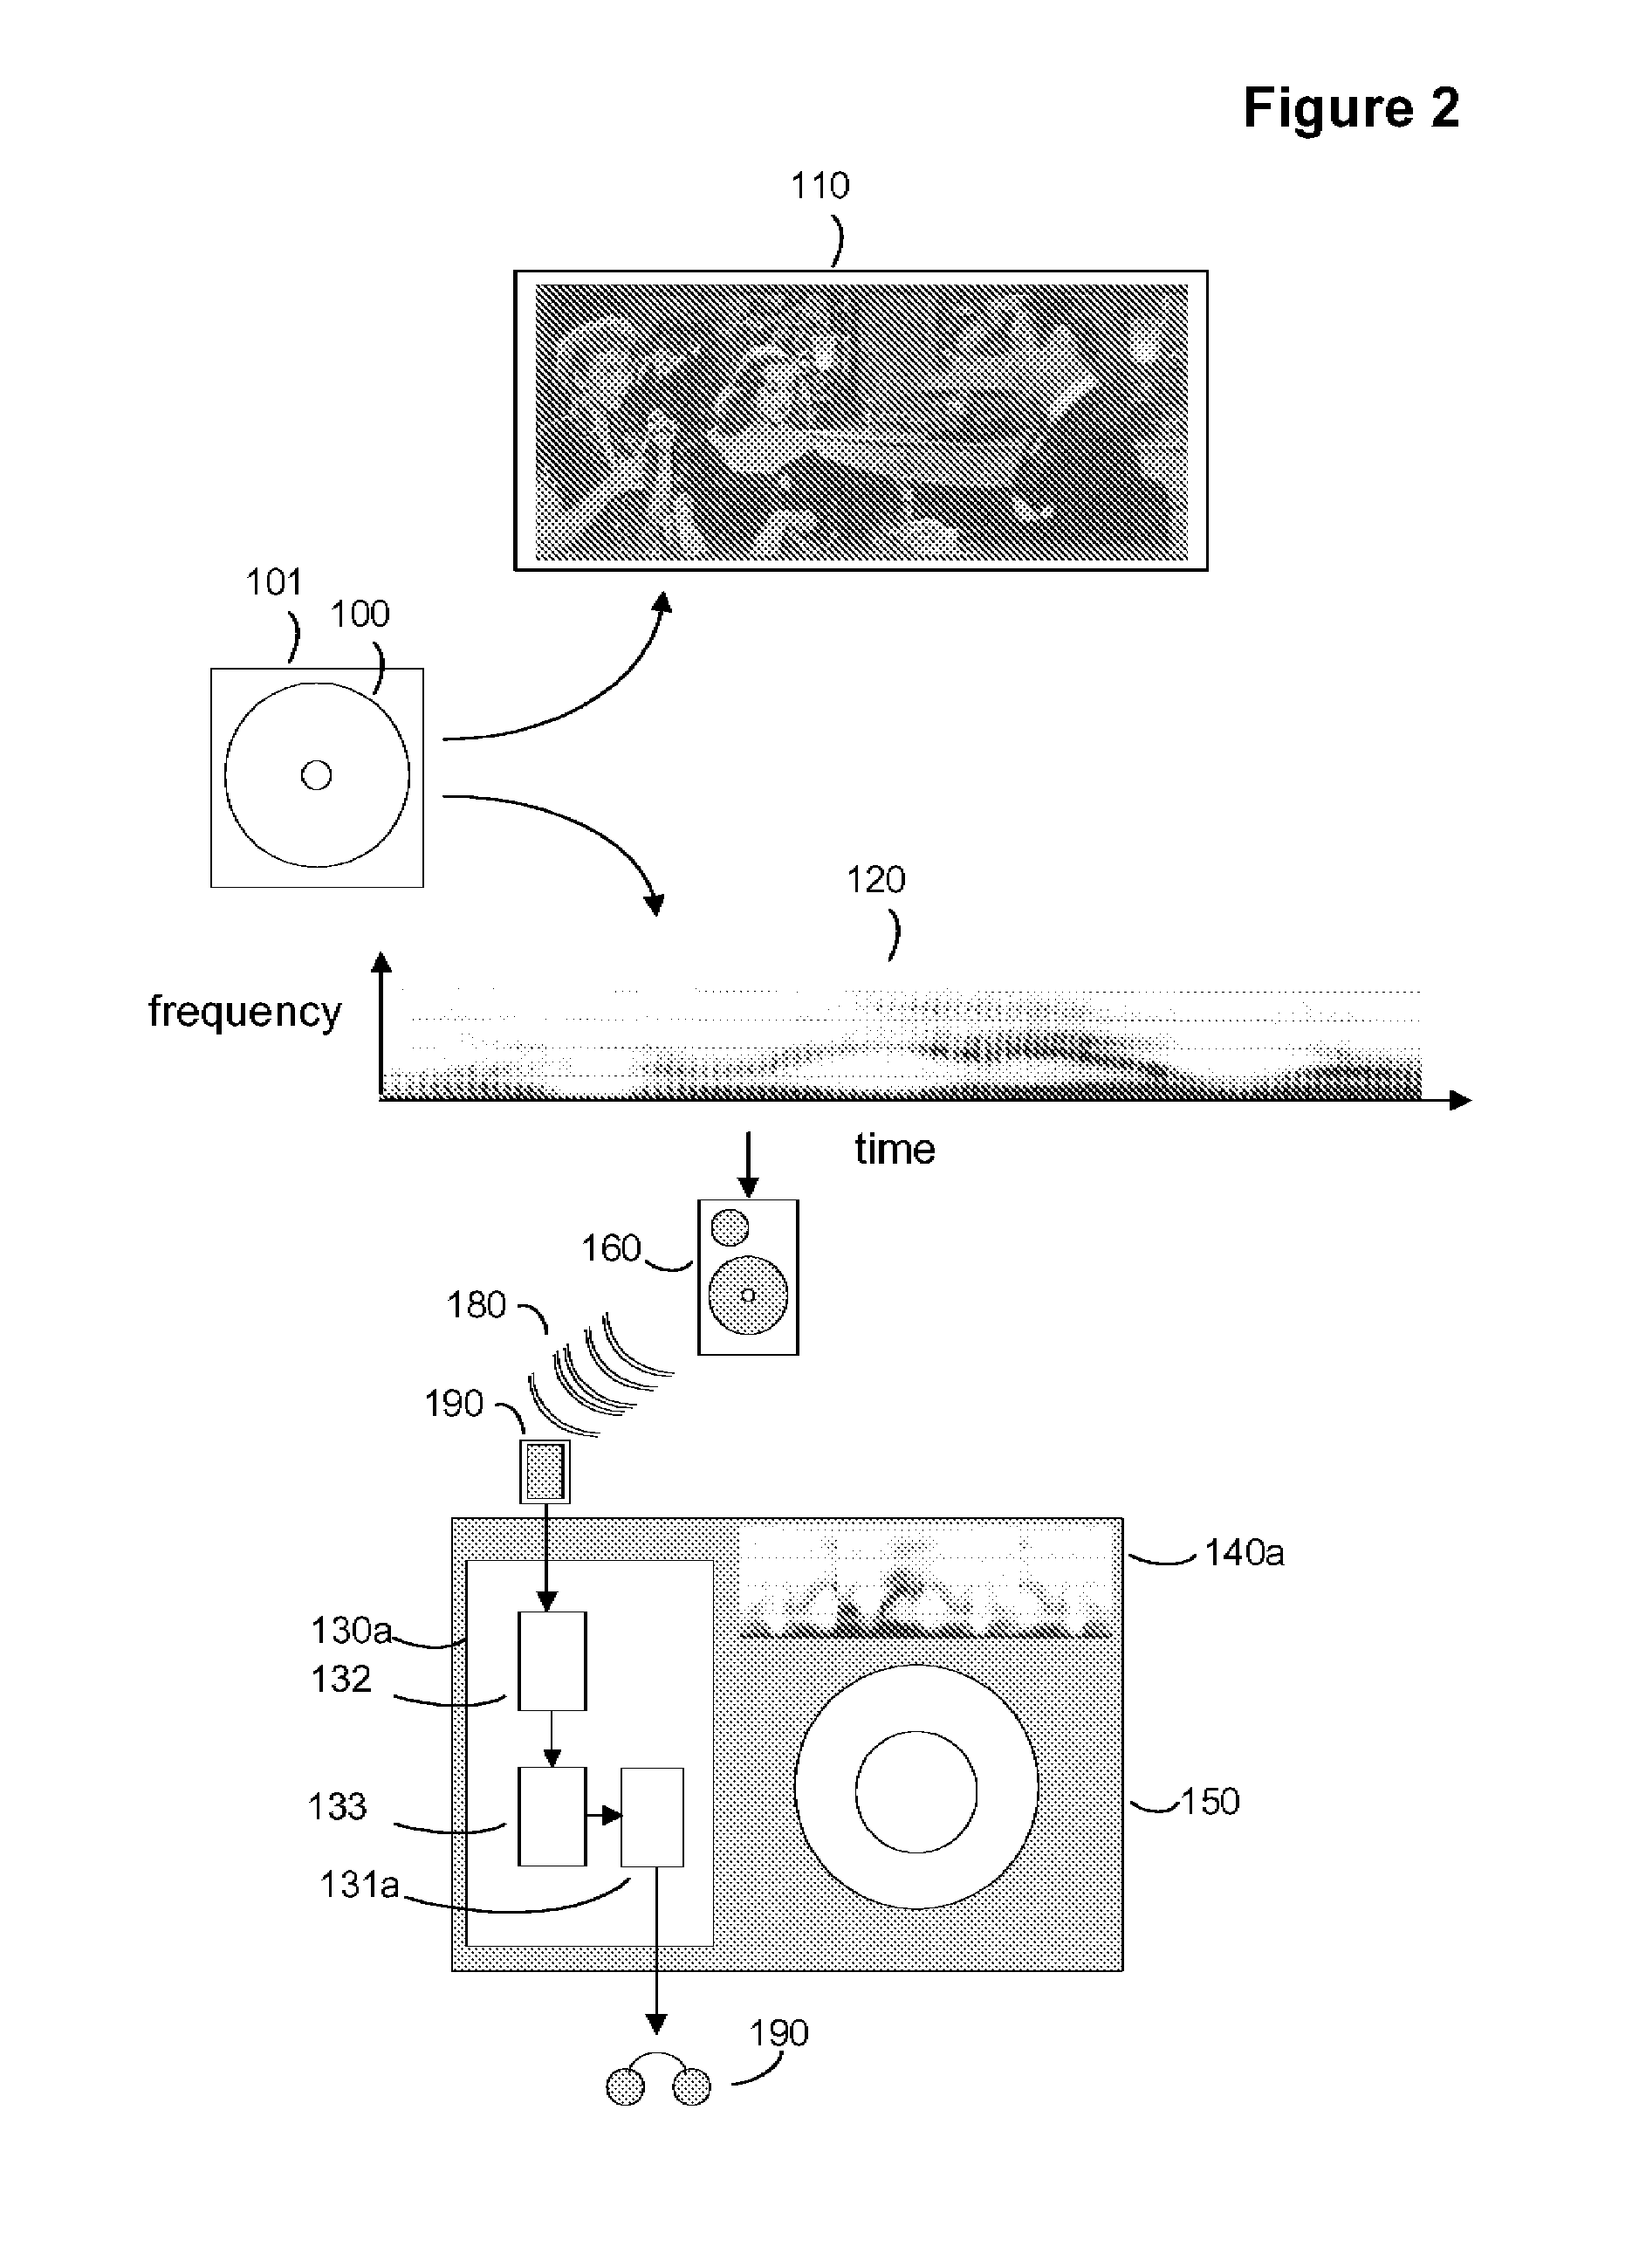 Apparatus and method for synchronizing a secondary audio track to the audio track of a video source